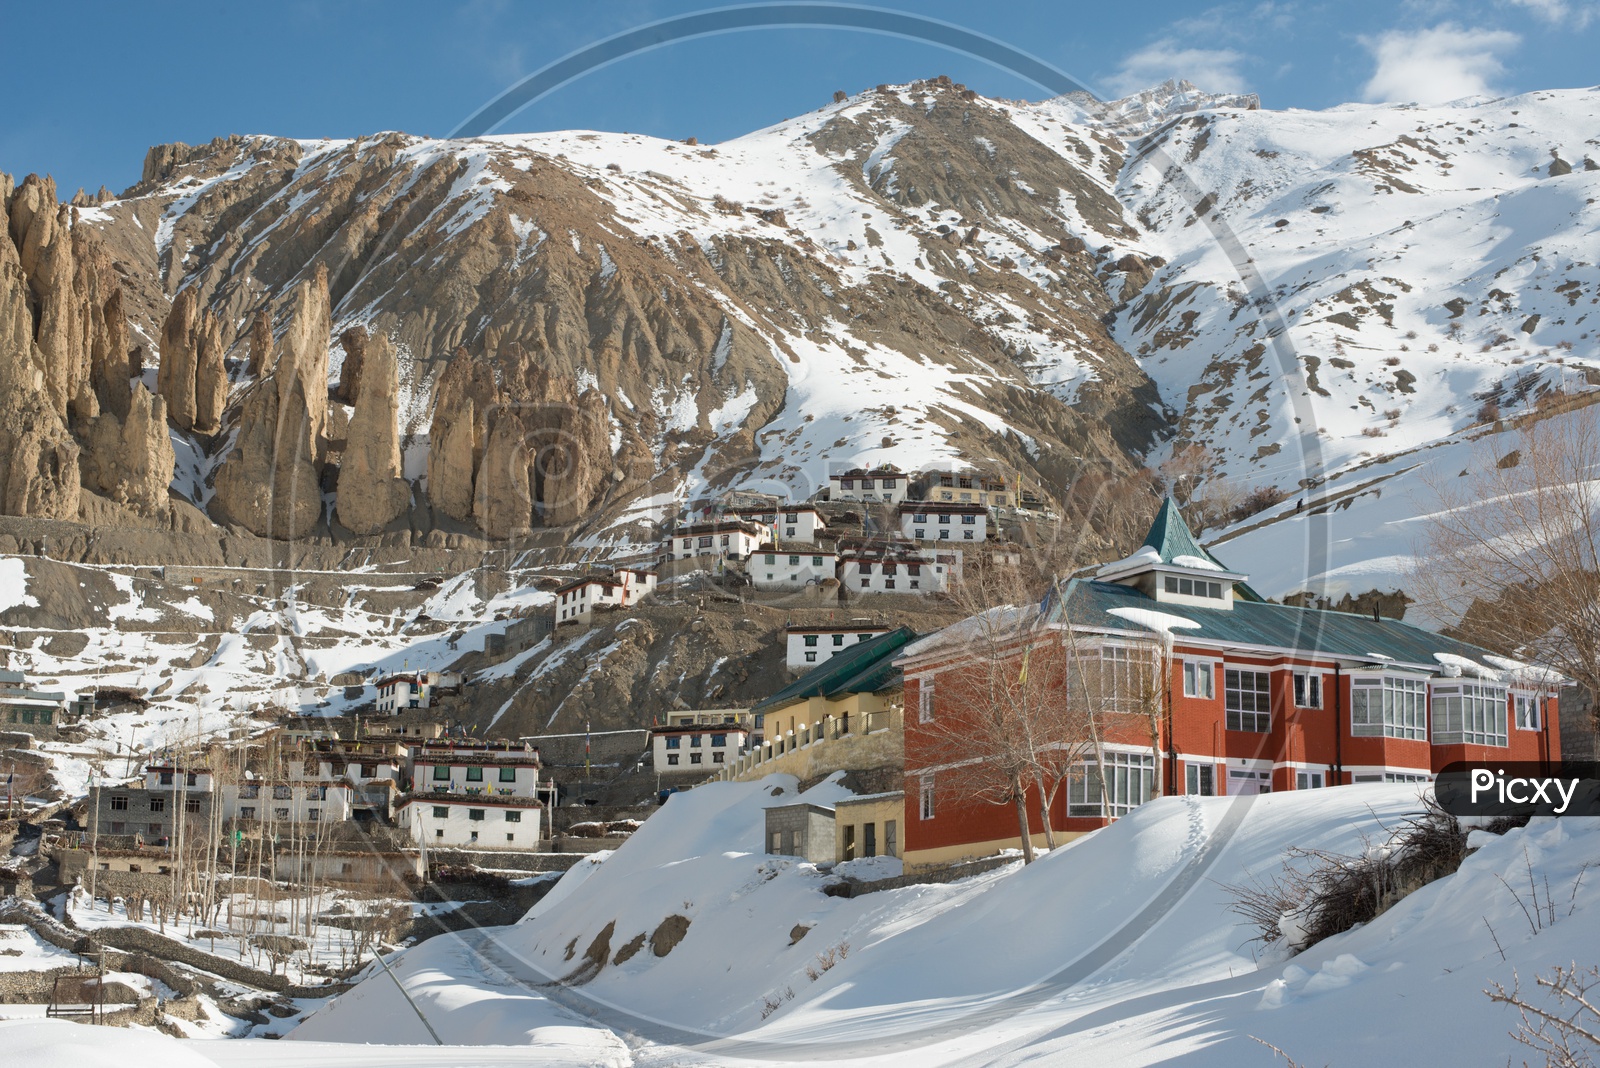 A Village in Spiti on Mountain Covered in Snow Surrounded by Snowy Himalayan Mountain Peaks in Winter